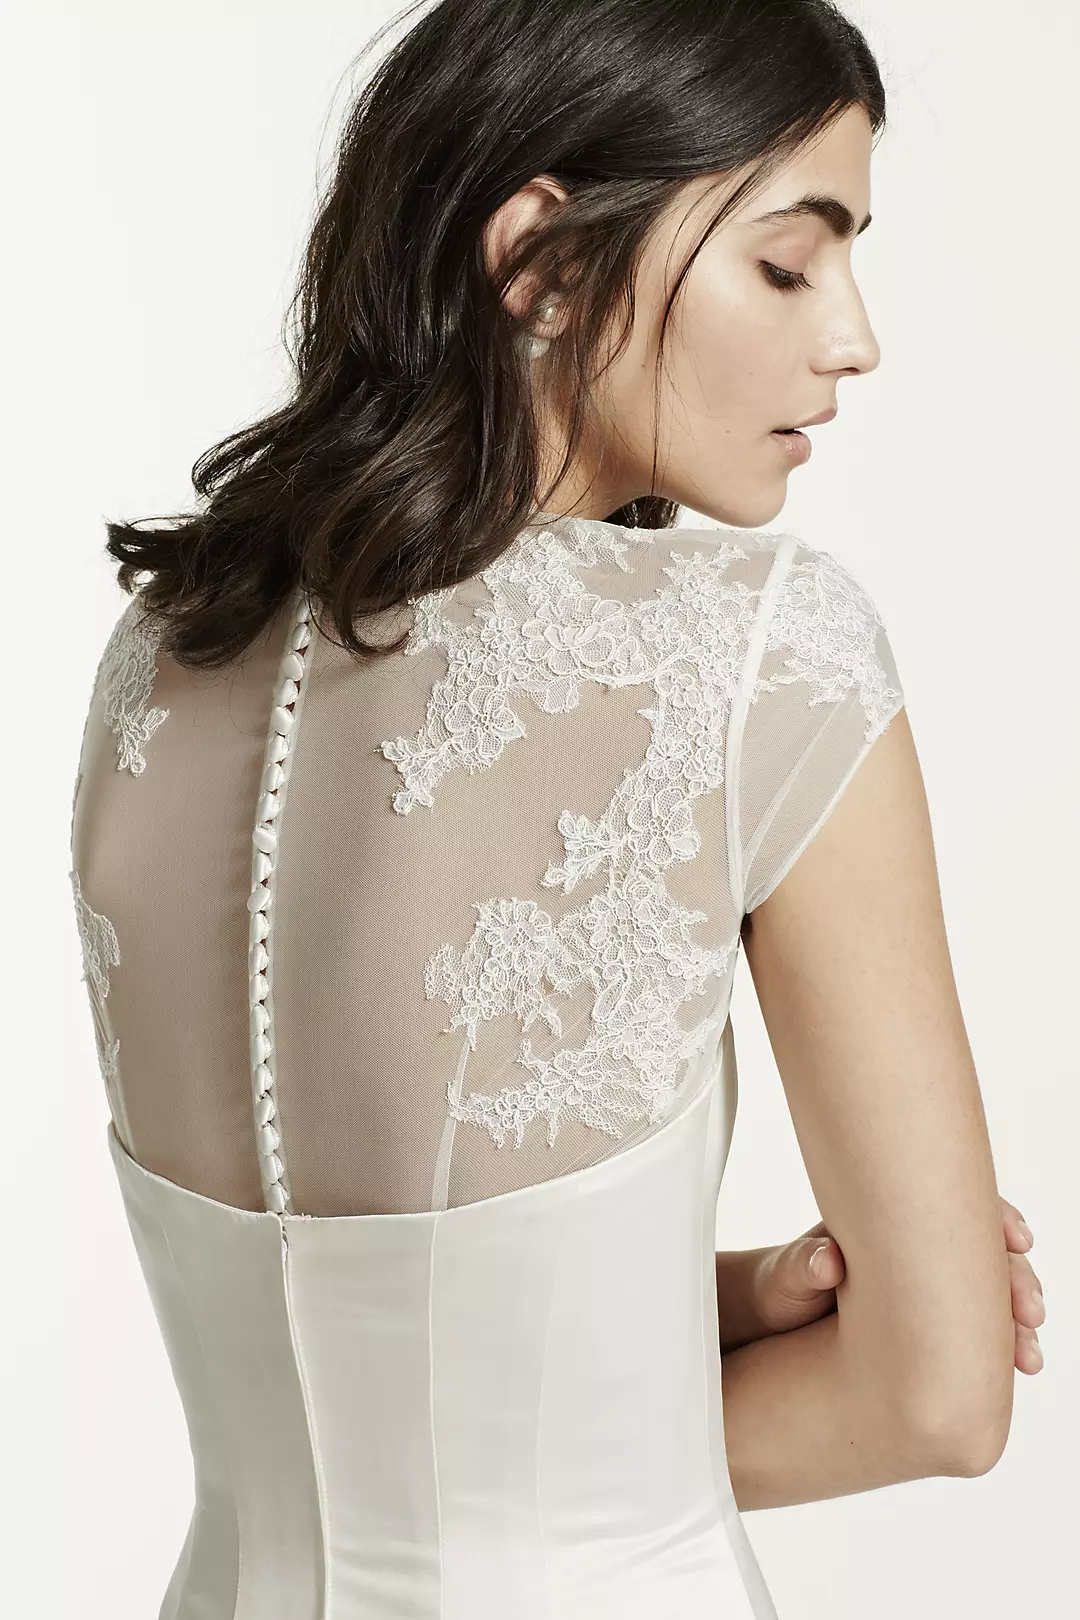 Tulle Cap Sleeve Topper with Lace Detailing Image